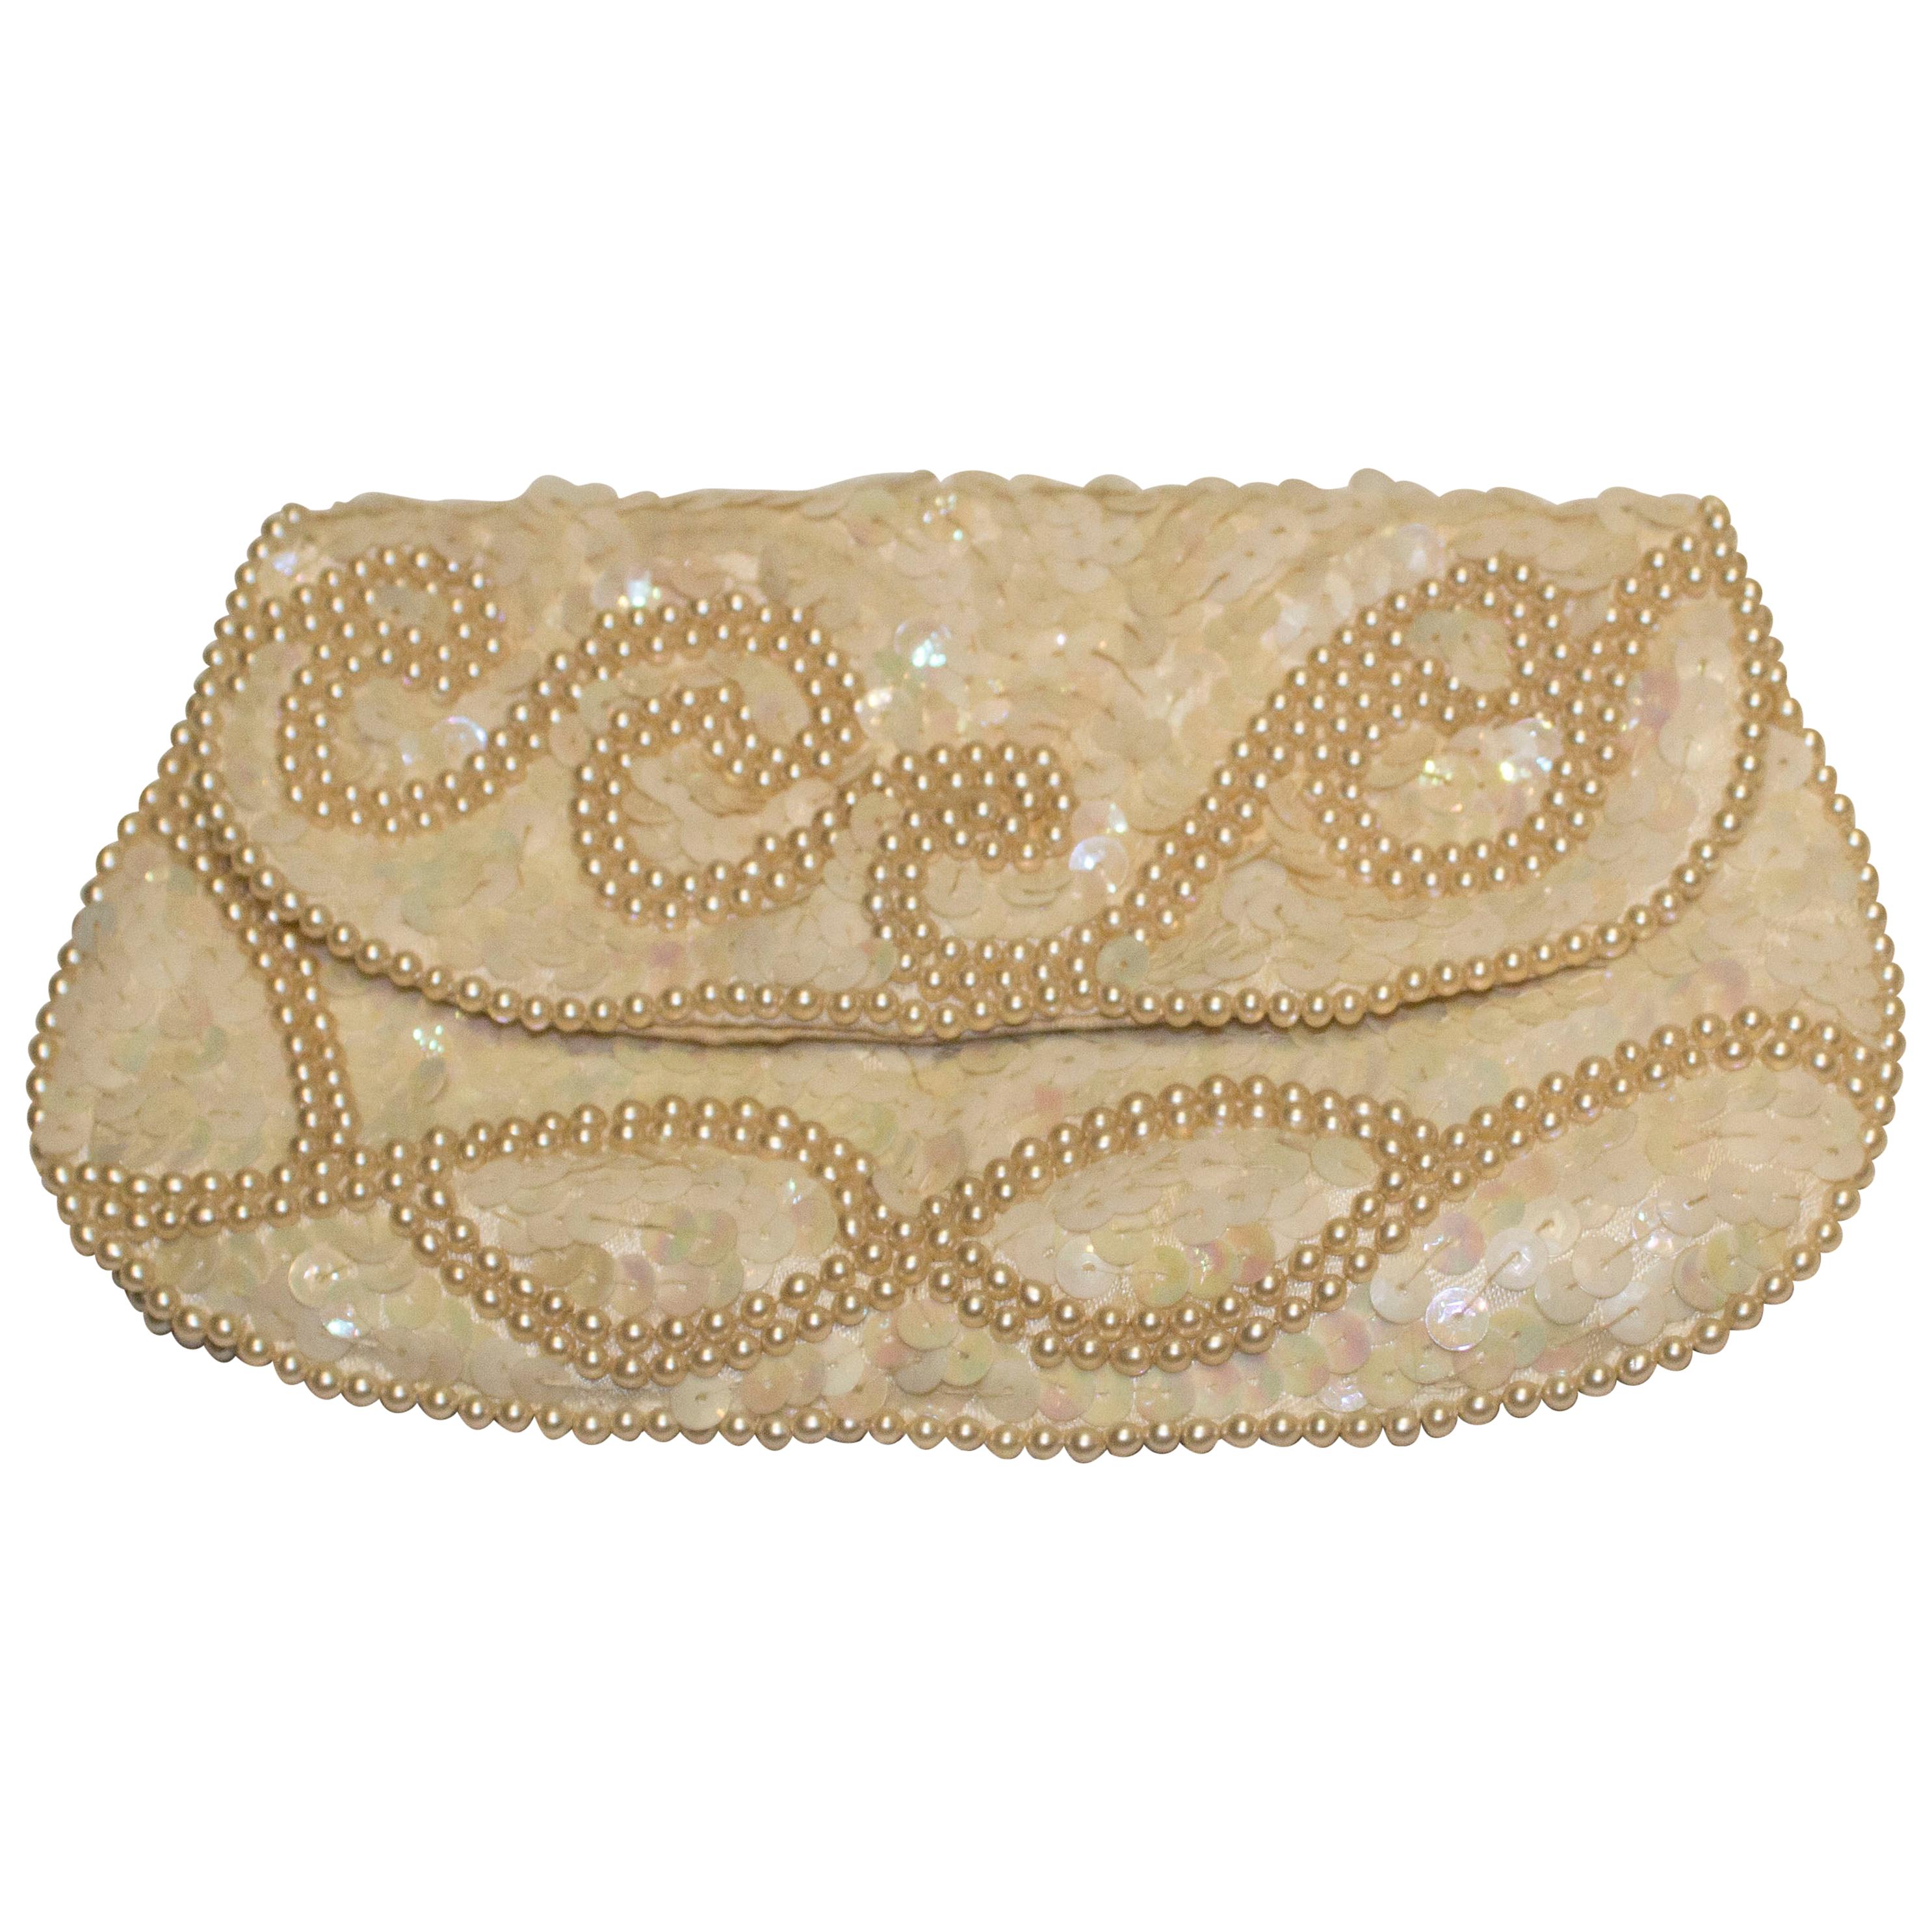 Vintage Cream Purse in Sequin and Beads